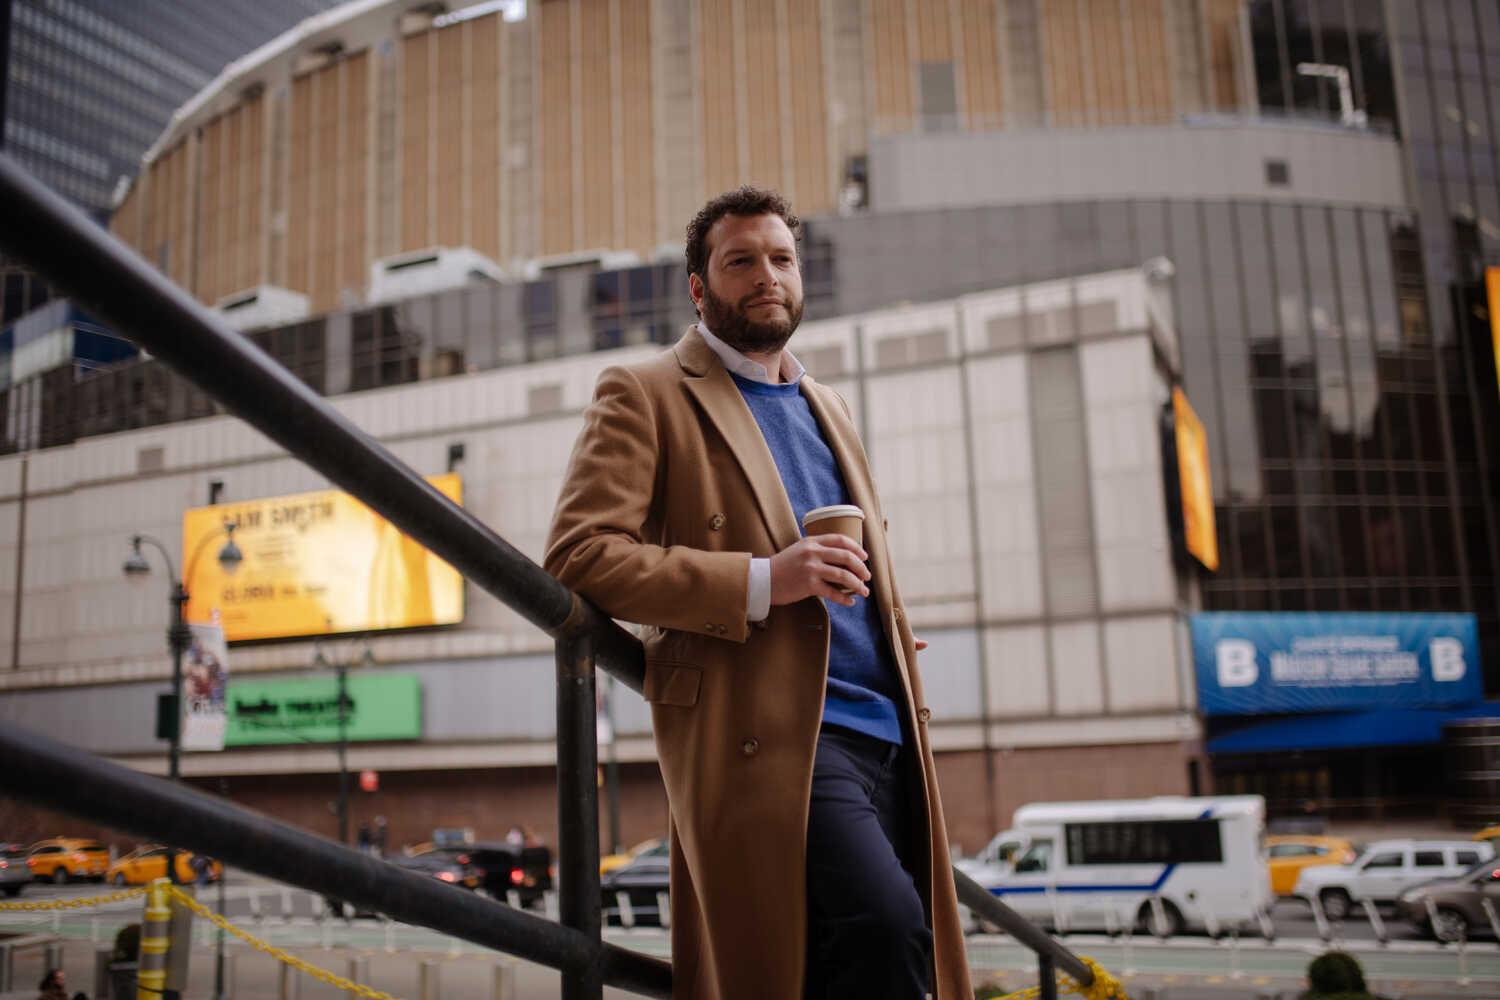 Benjamin Noren is standing on stairs in front of Madison Square Garden, leaning on a handrail, holding a coffee cup.